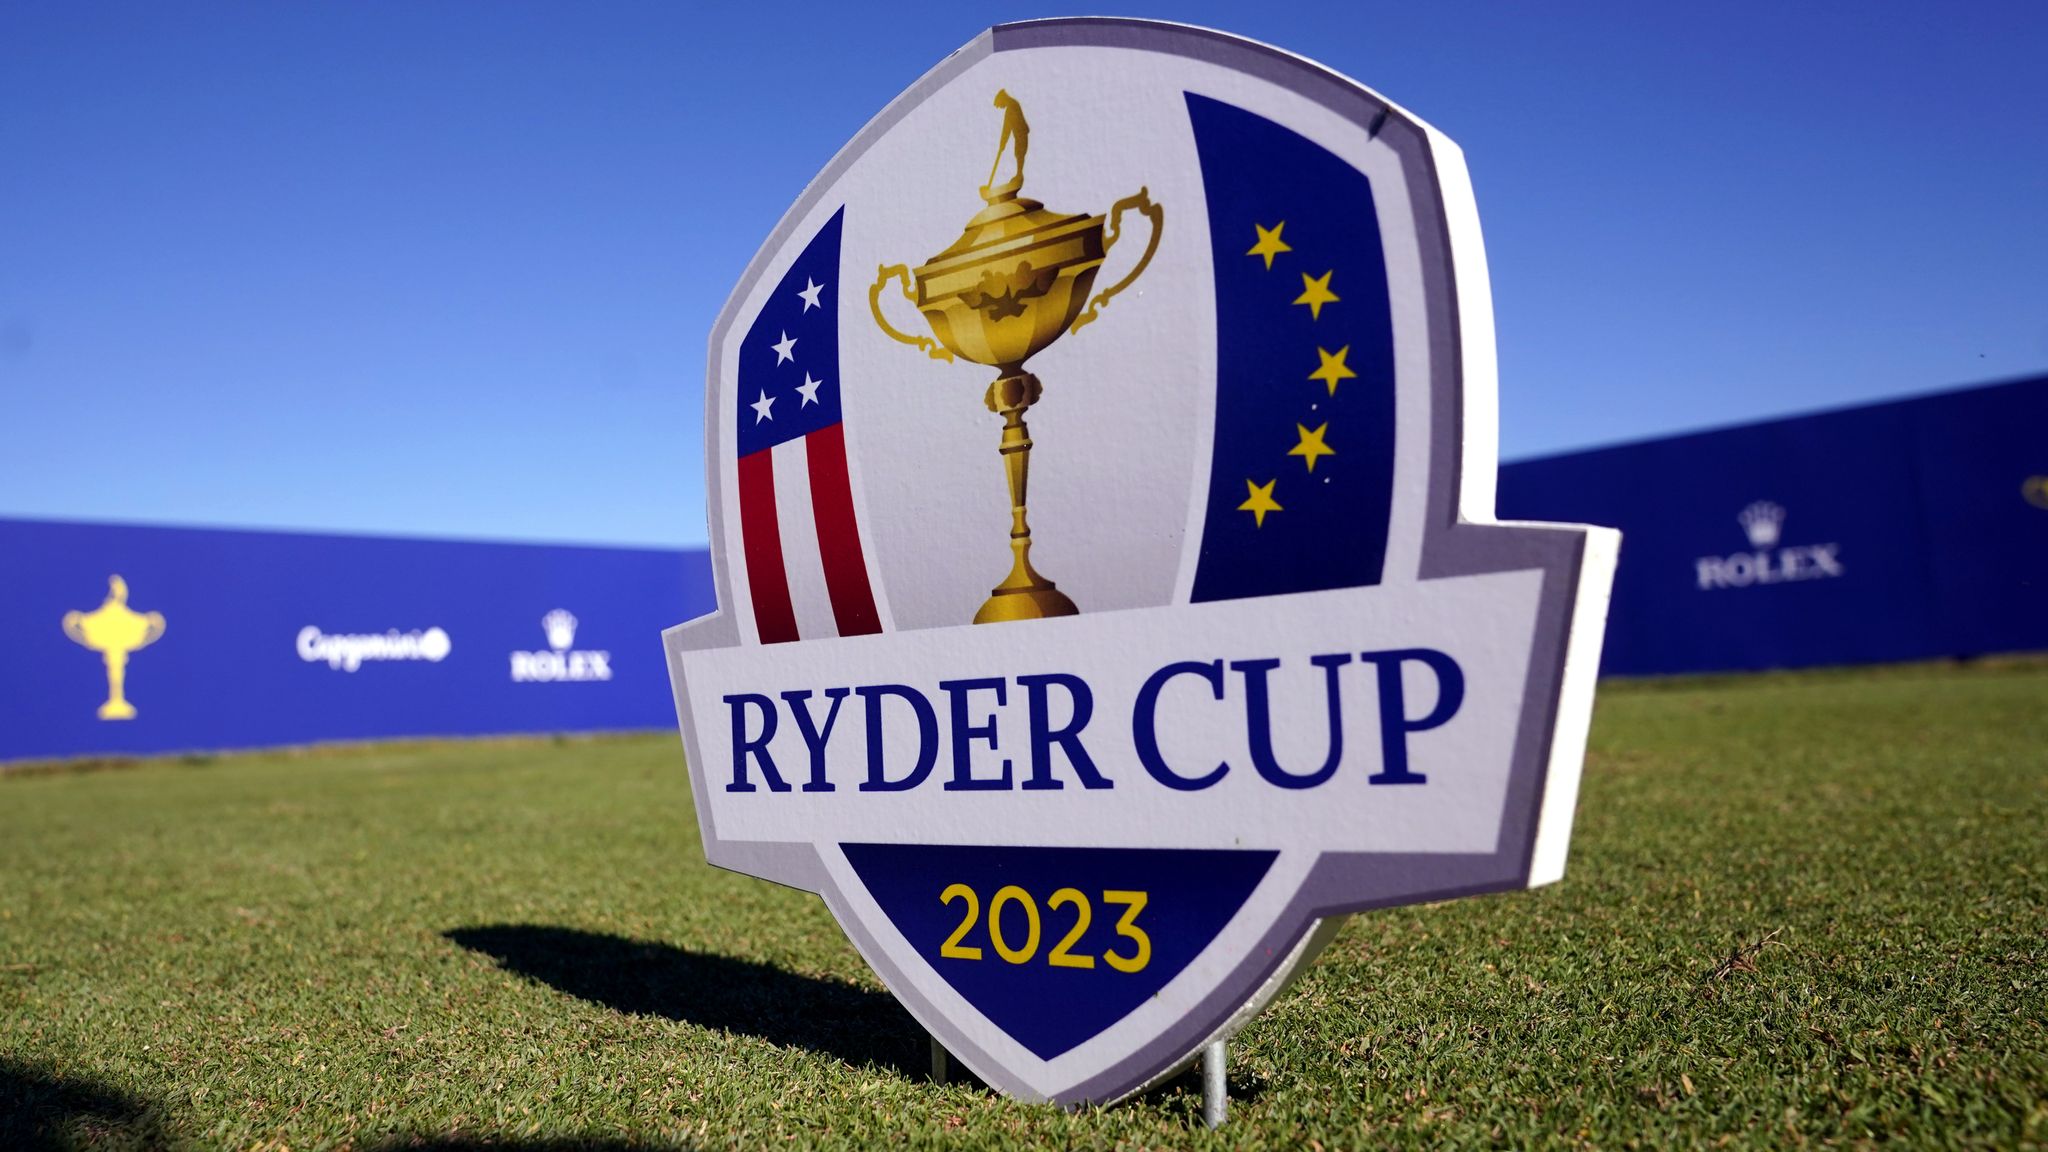 2023 Ryder Cup Schedule: How and When to Watch the USA vs. Europe